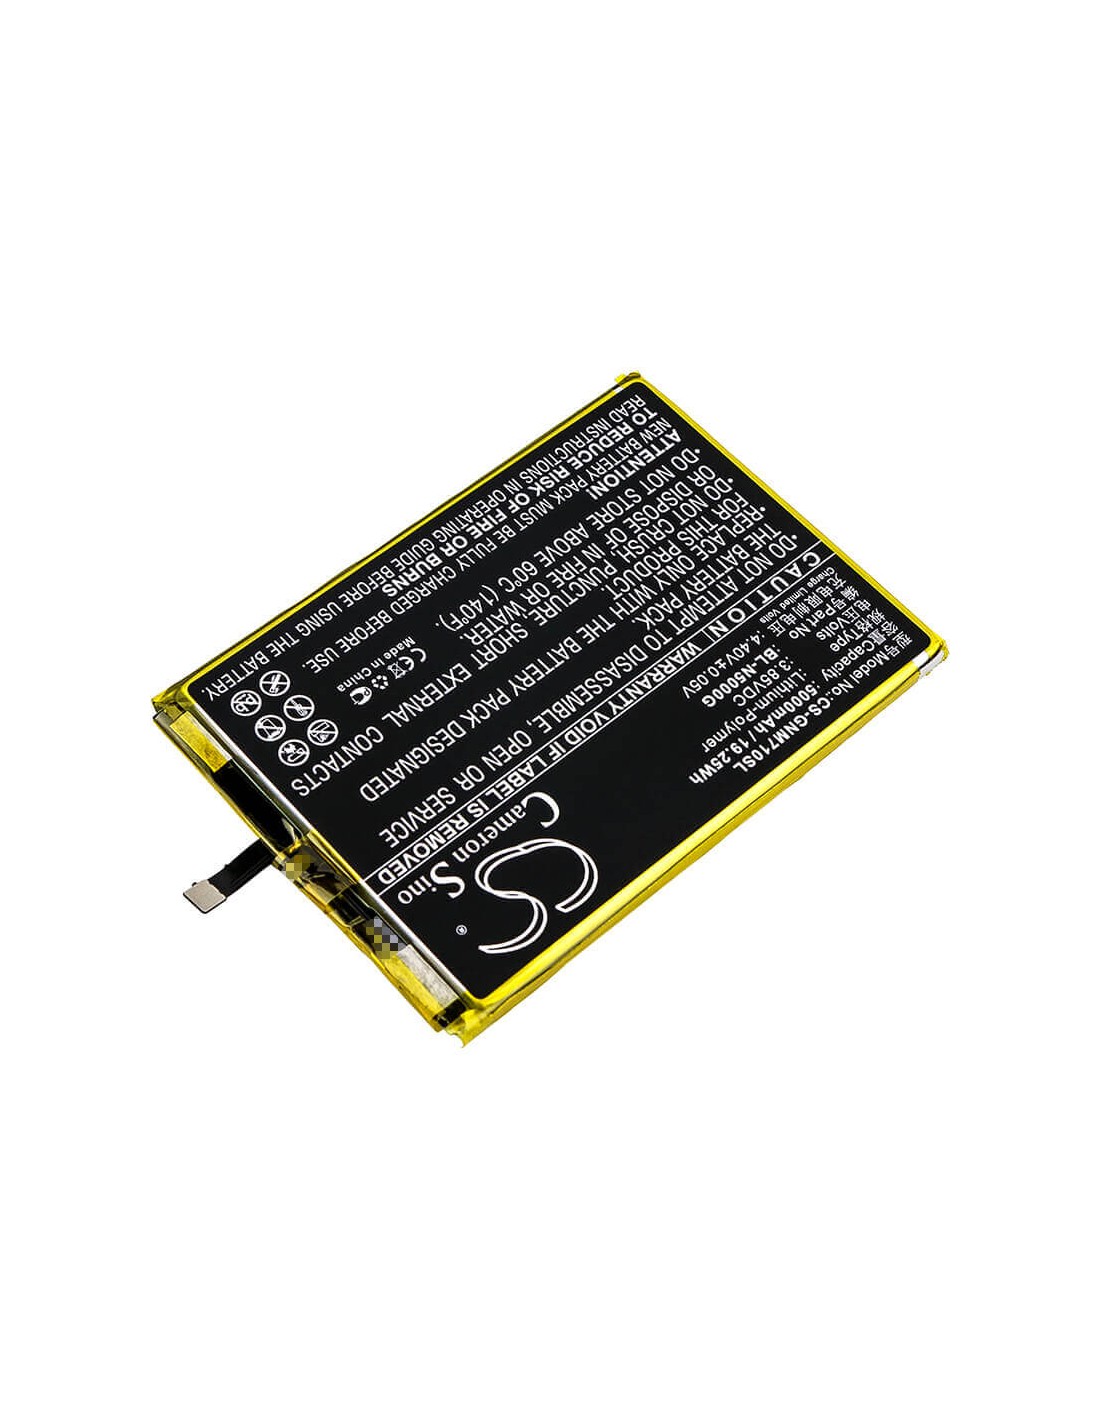 Battery for Gionee, Gn5007, Gn5007l, M7 Power 3.85V, 5000mAh - 19.25Wh